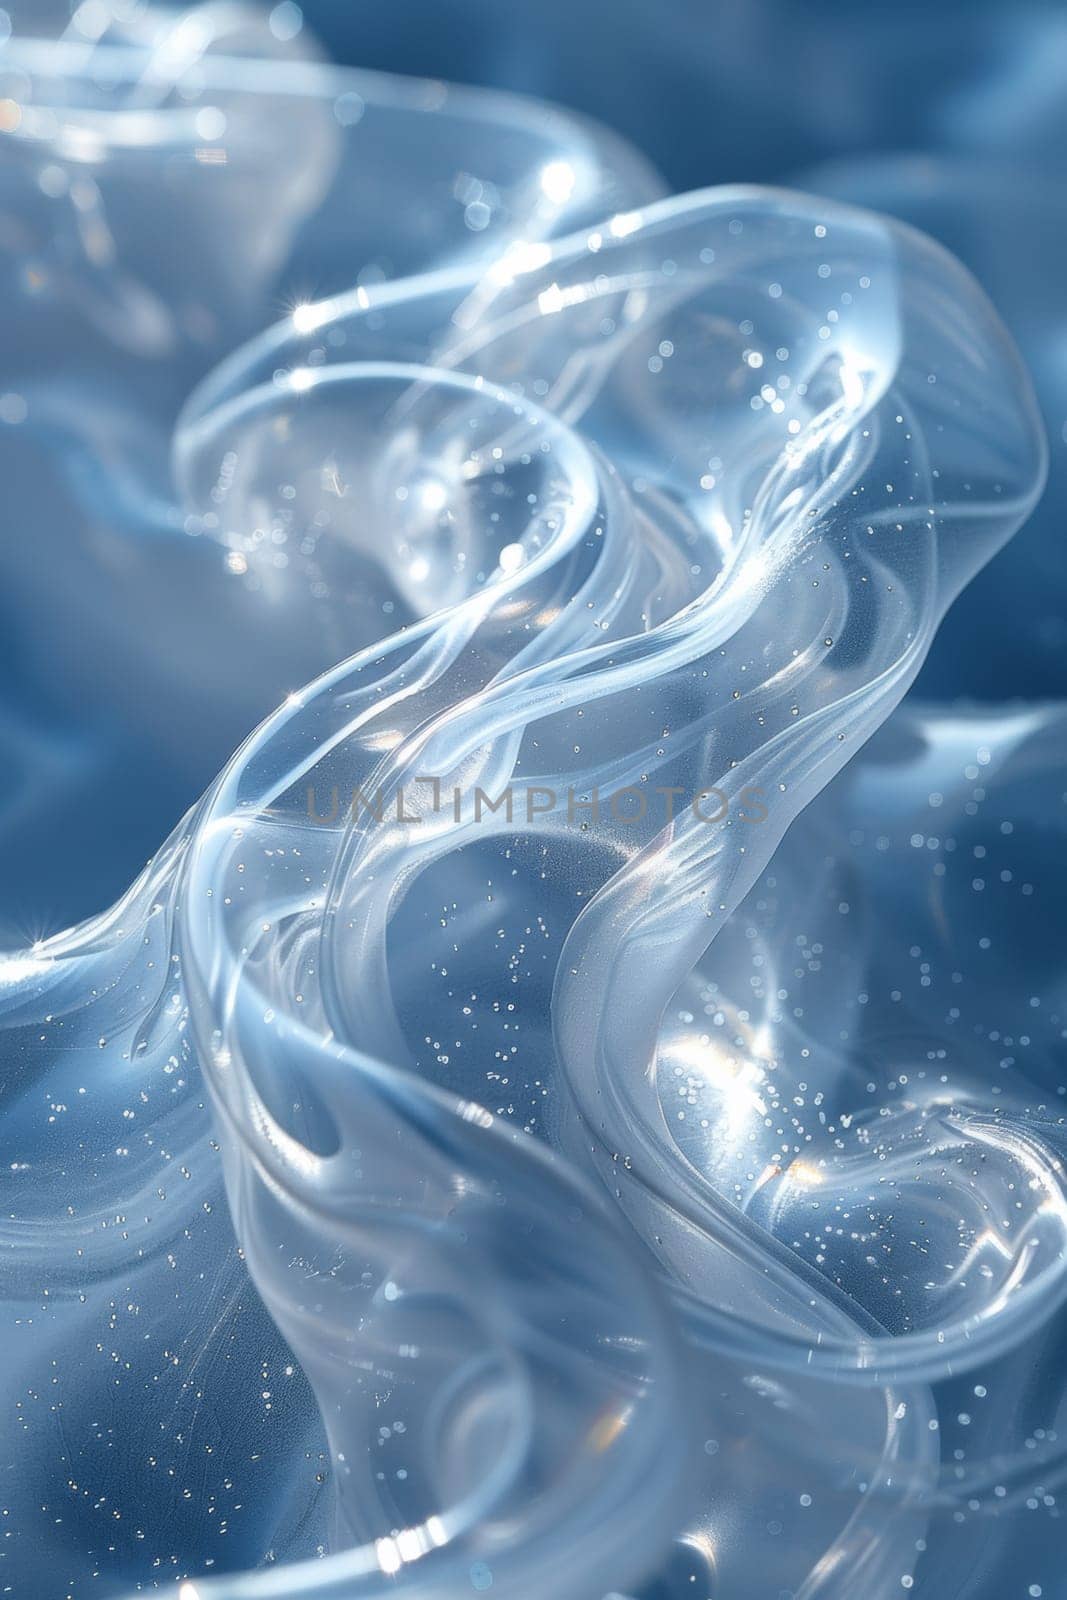 A close up of a liquid substance that is flowing